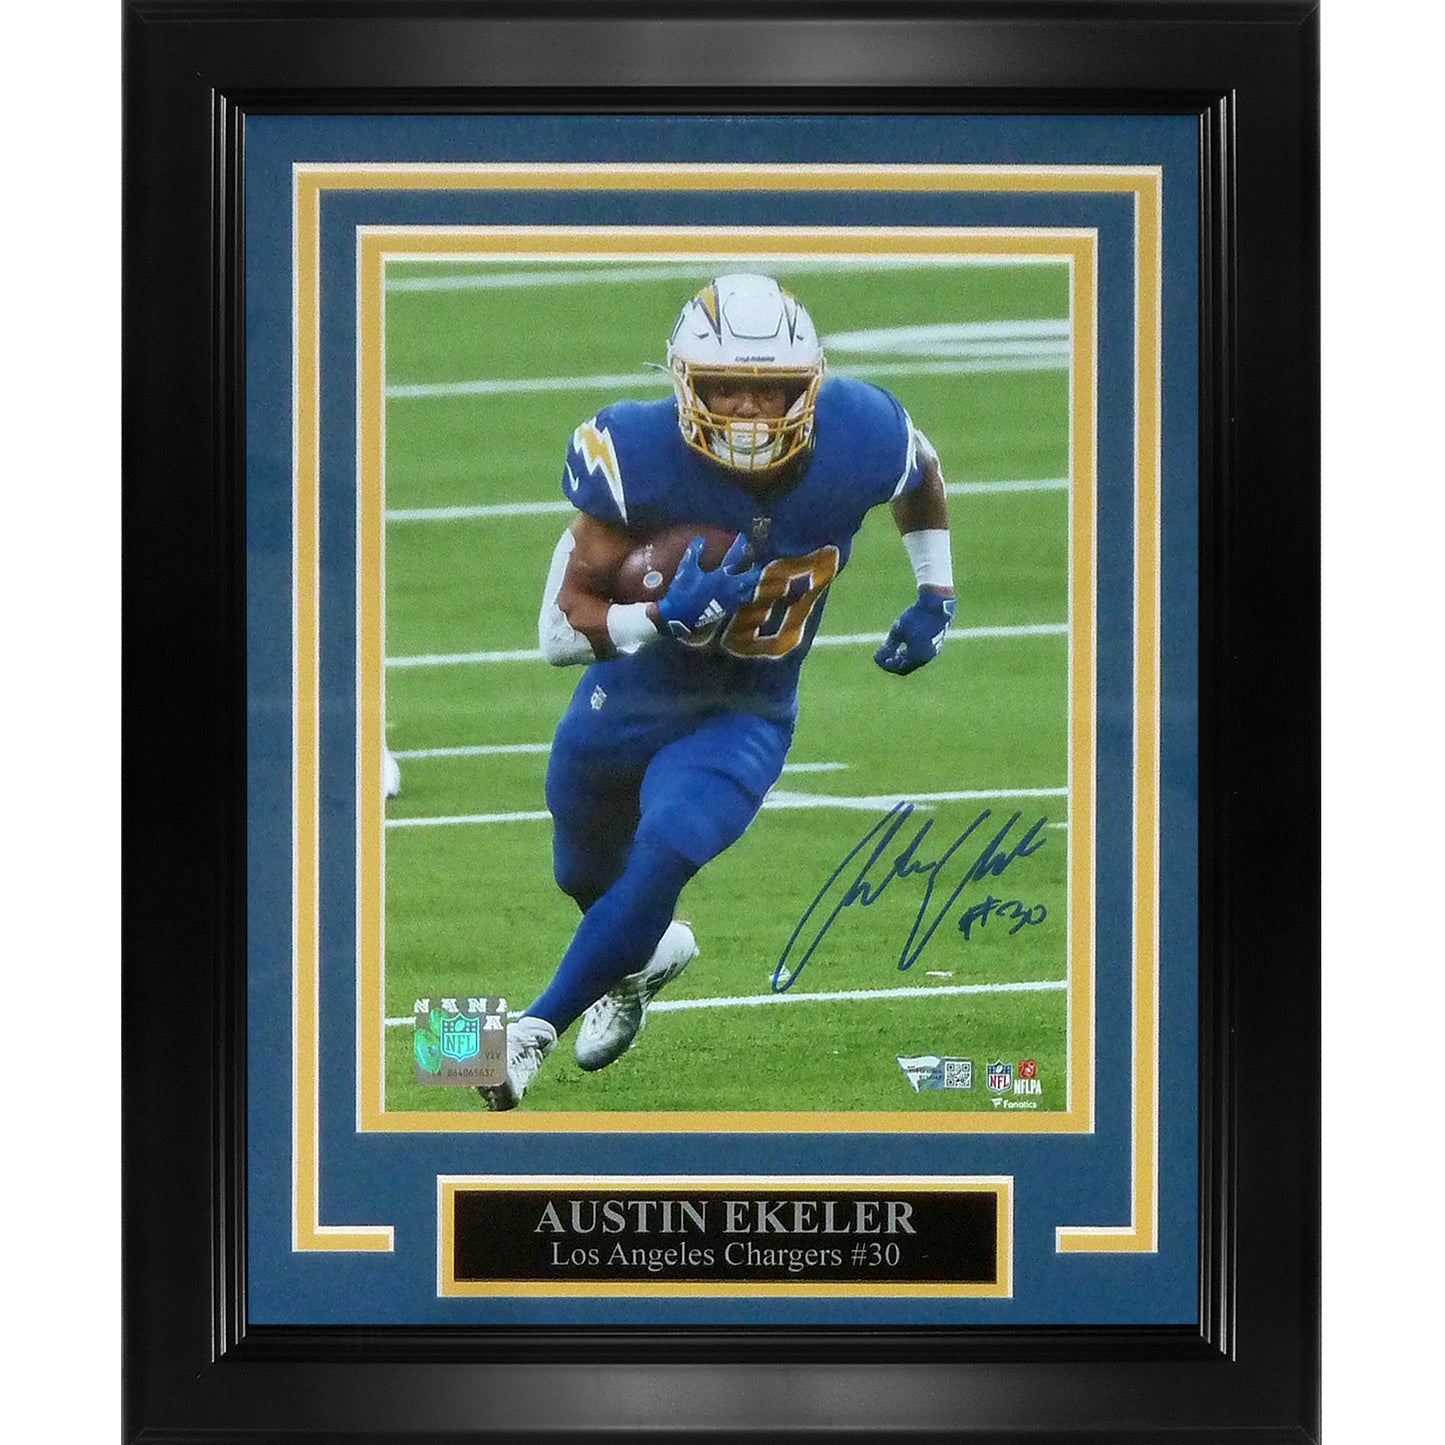 Austin Ekeler Autographed Los Angeles Chargers Deluxe Framed 8x10 Photo - Fanatics